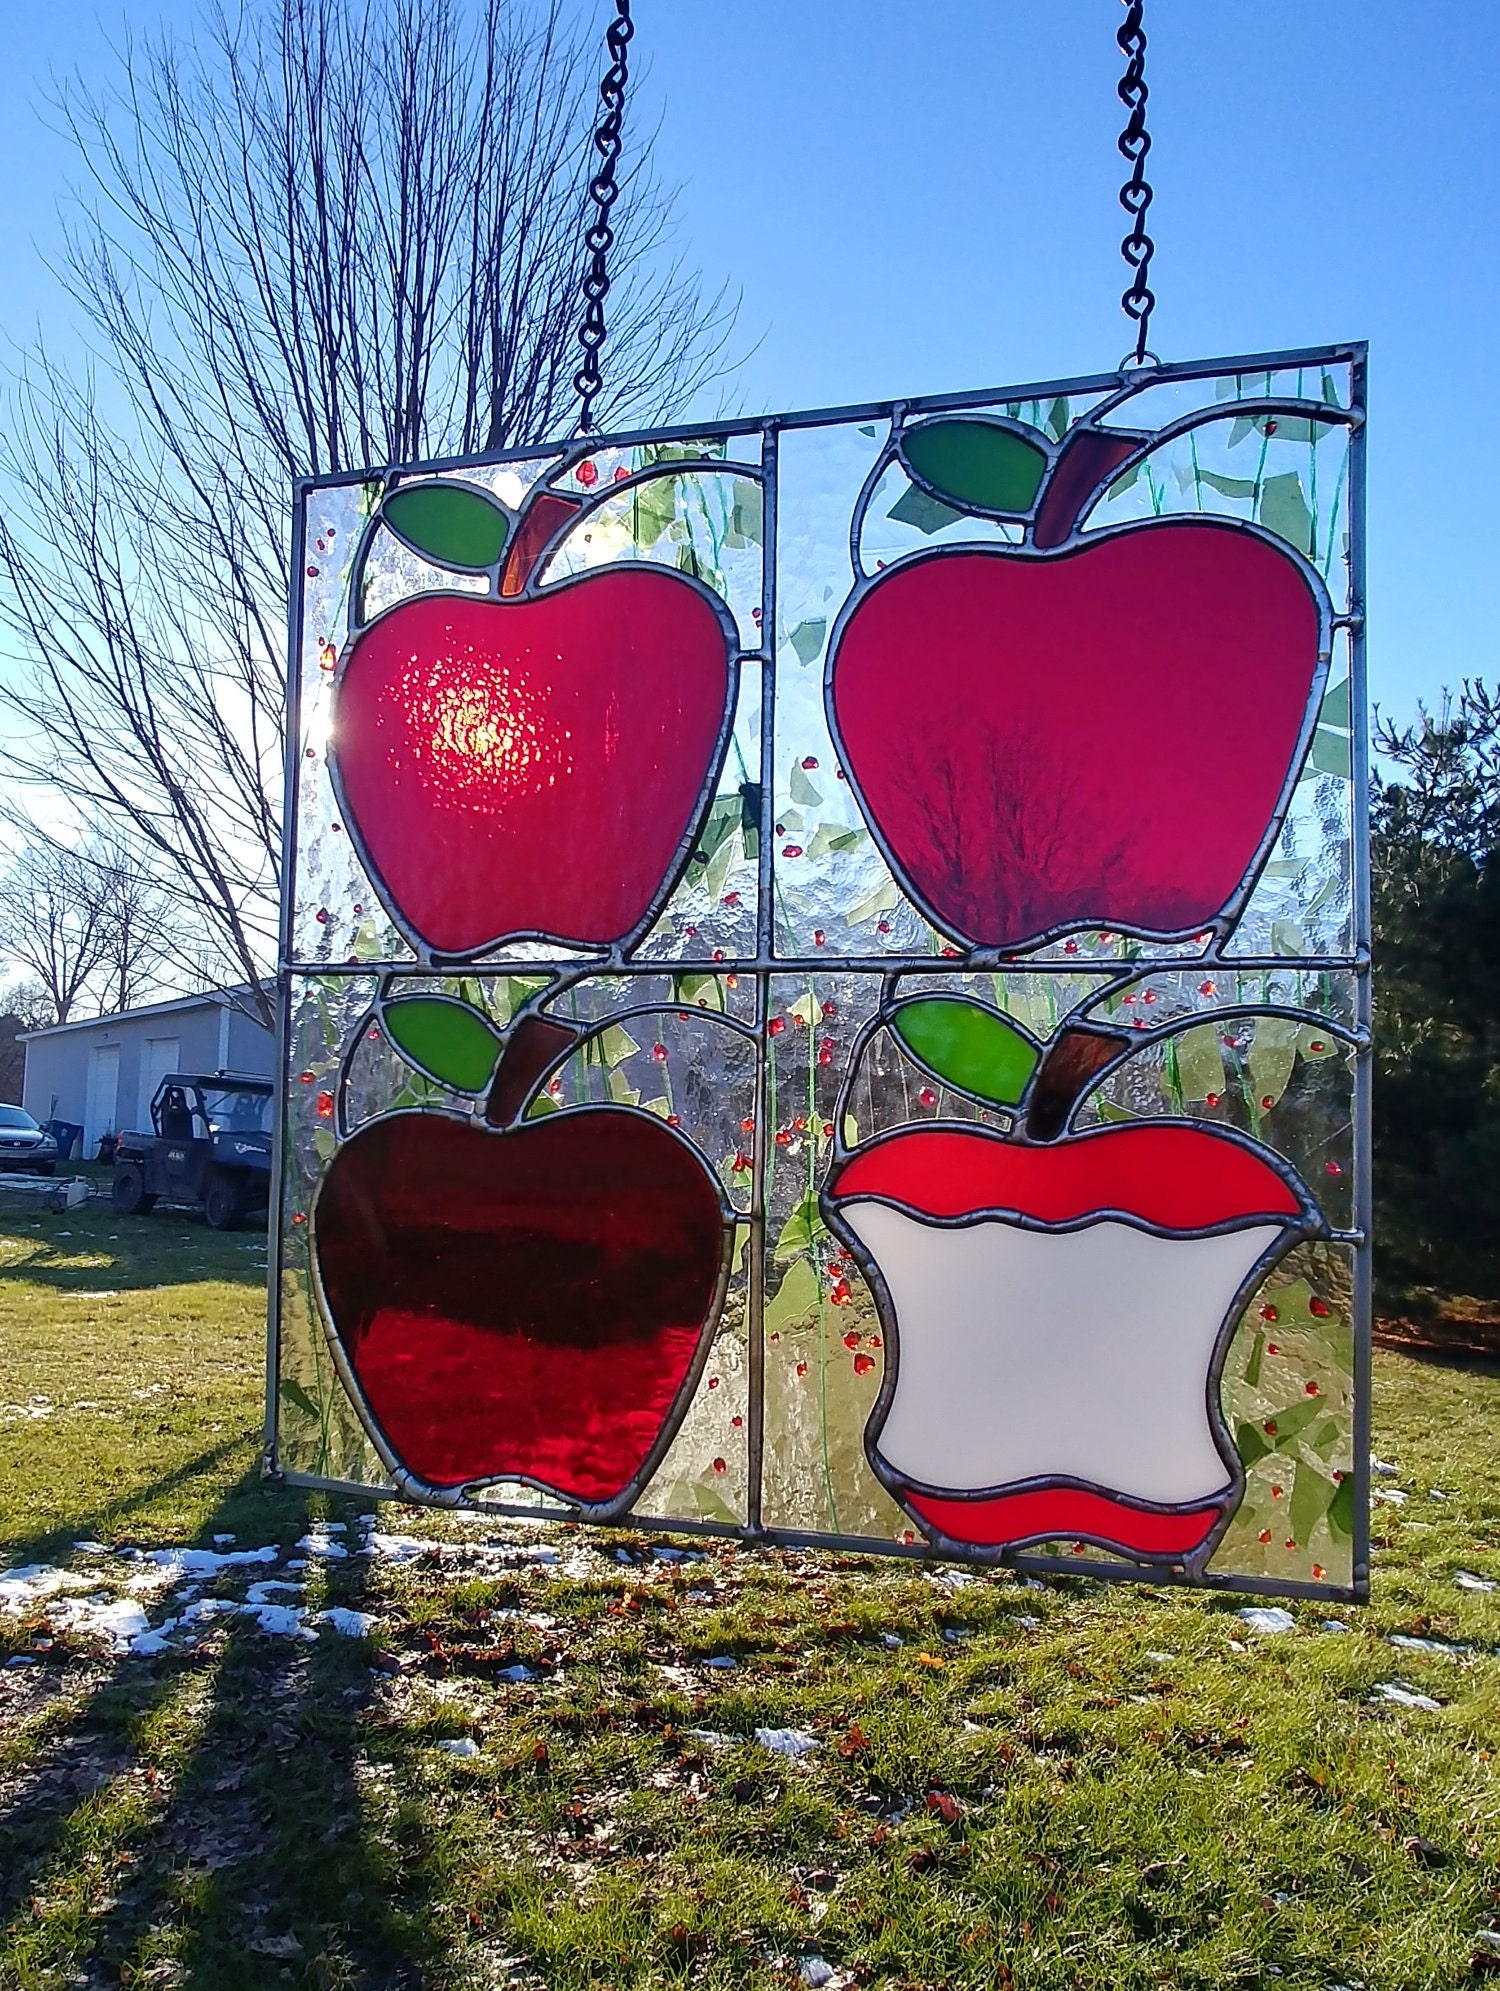 New JoLite Simulated Stained Glass #602 Window Hanging Kit 11”x14” Apples